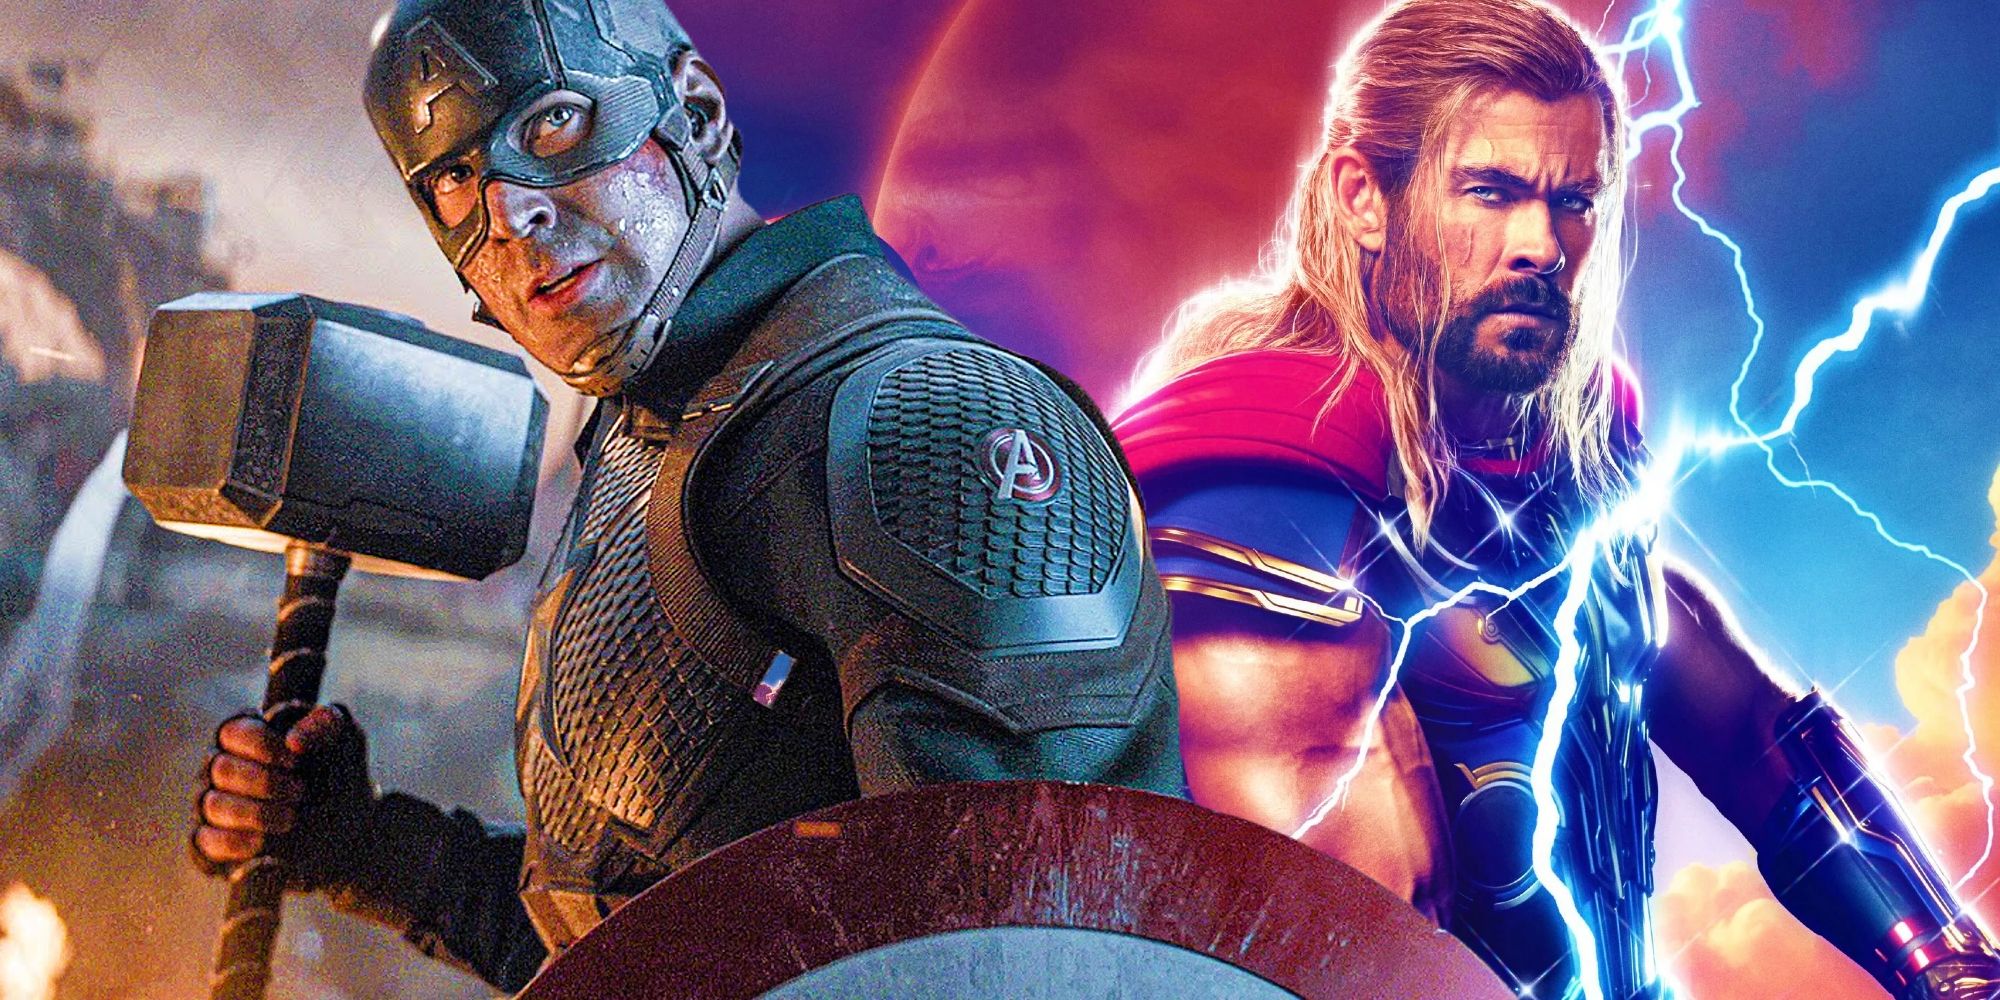 Captain America lifting Mjolnir in Avengers: Endgame next to Thor in the MCU